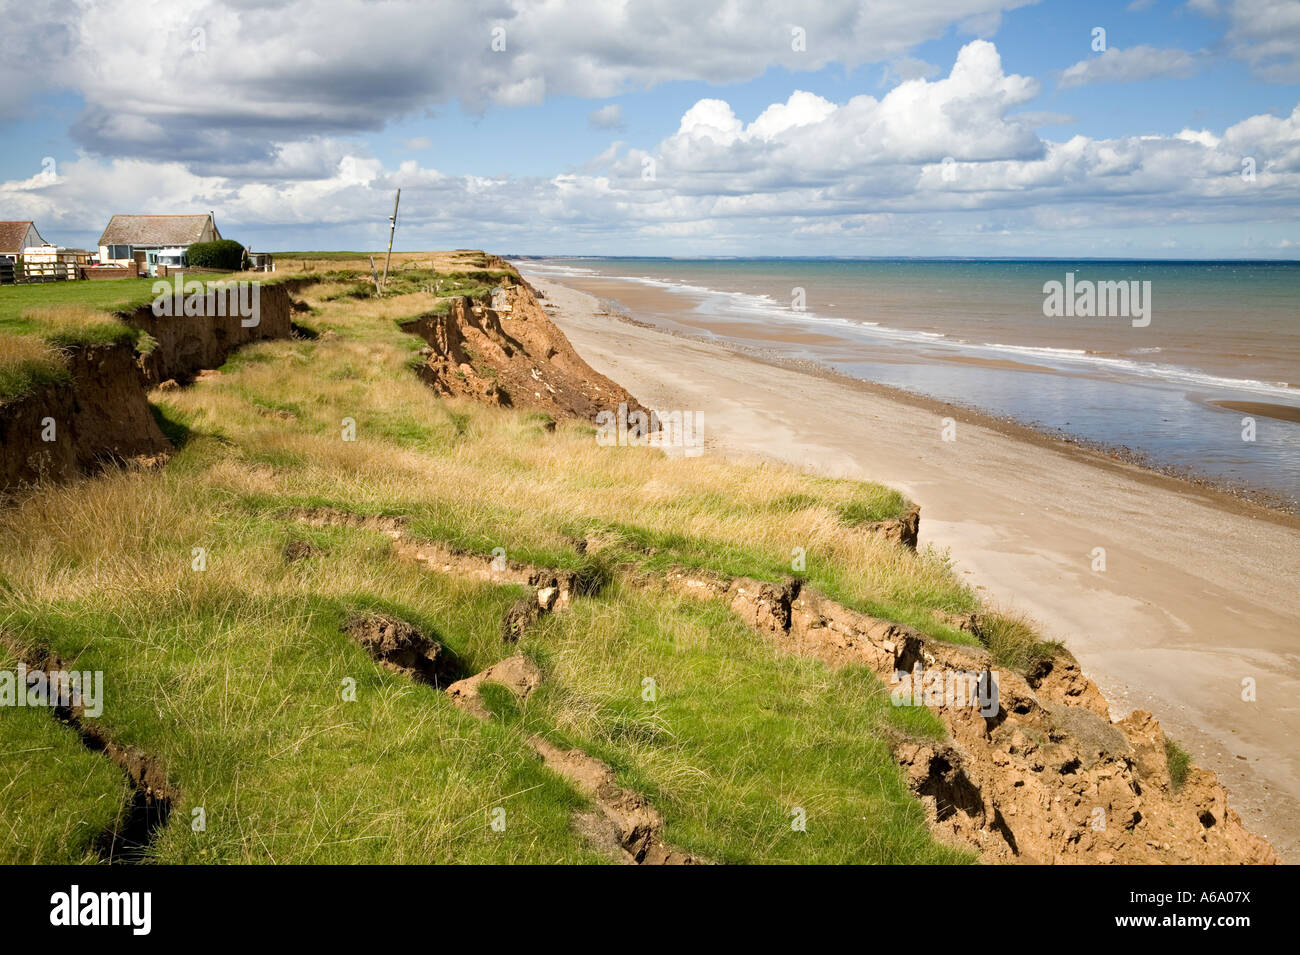 The collapsing cliff edge at Aldbrough, Yorkshire, UK. Erosion of the East coast. Stock Photo